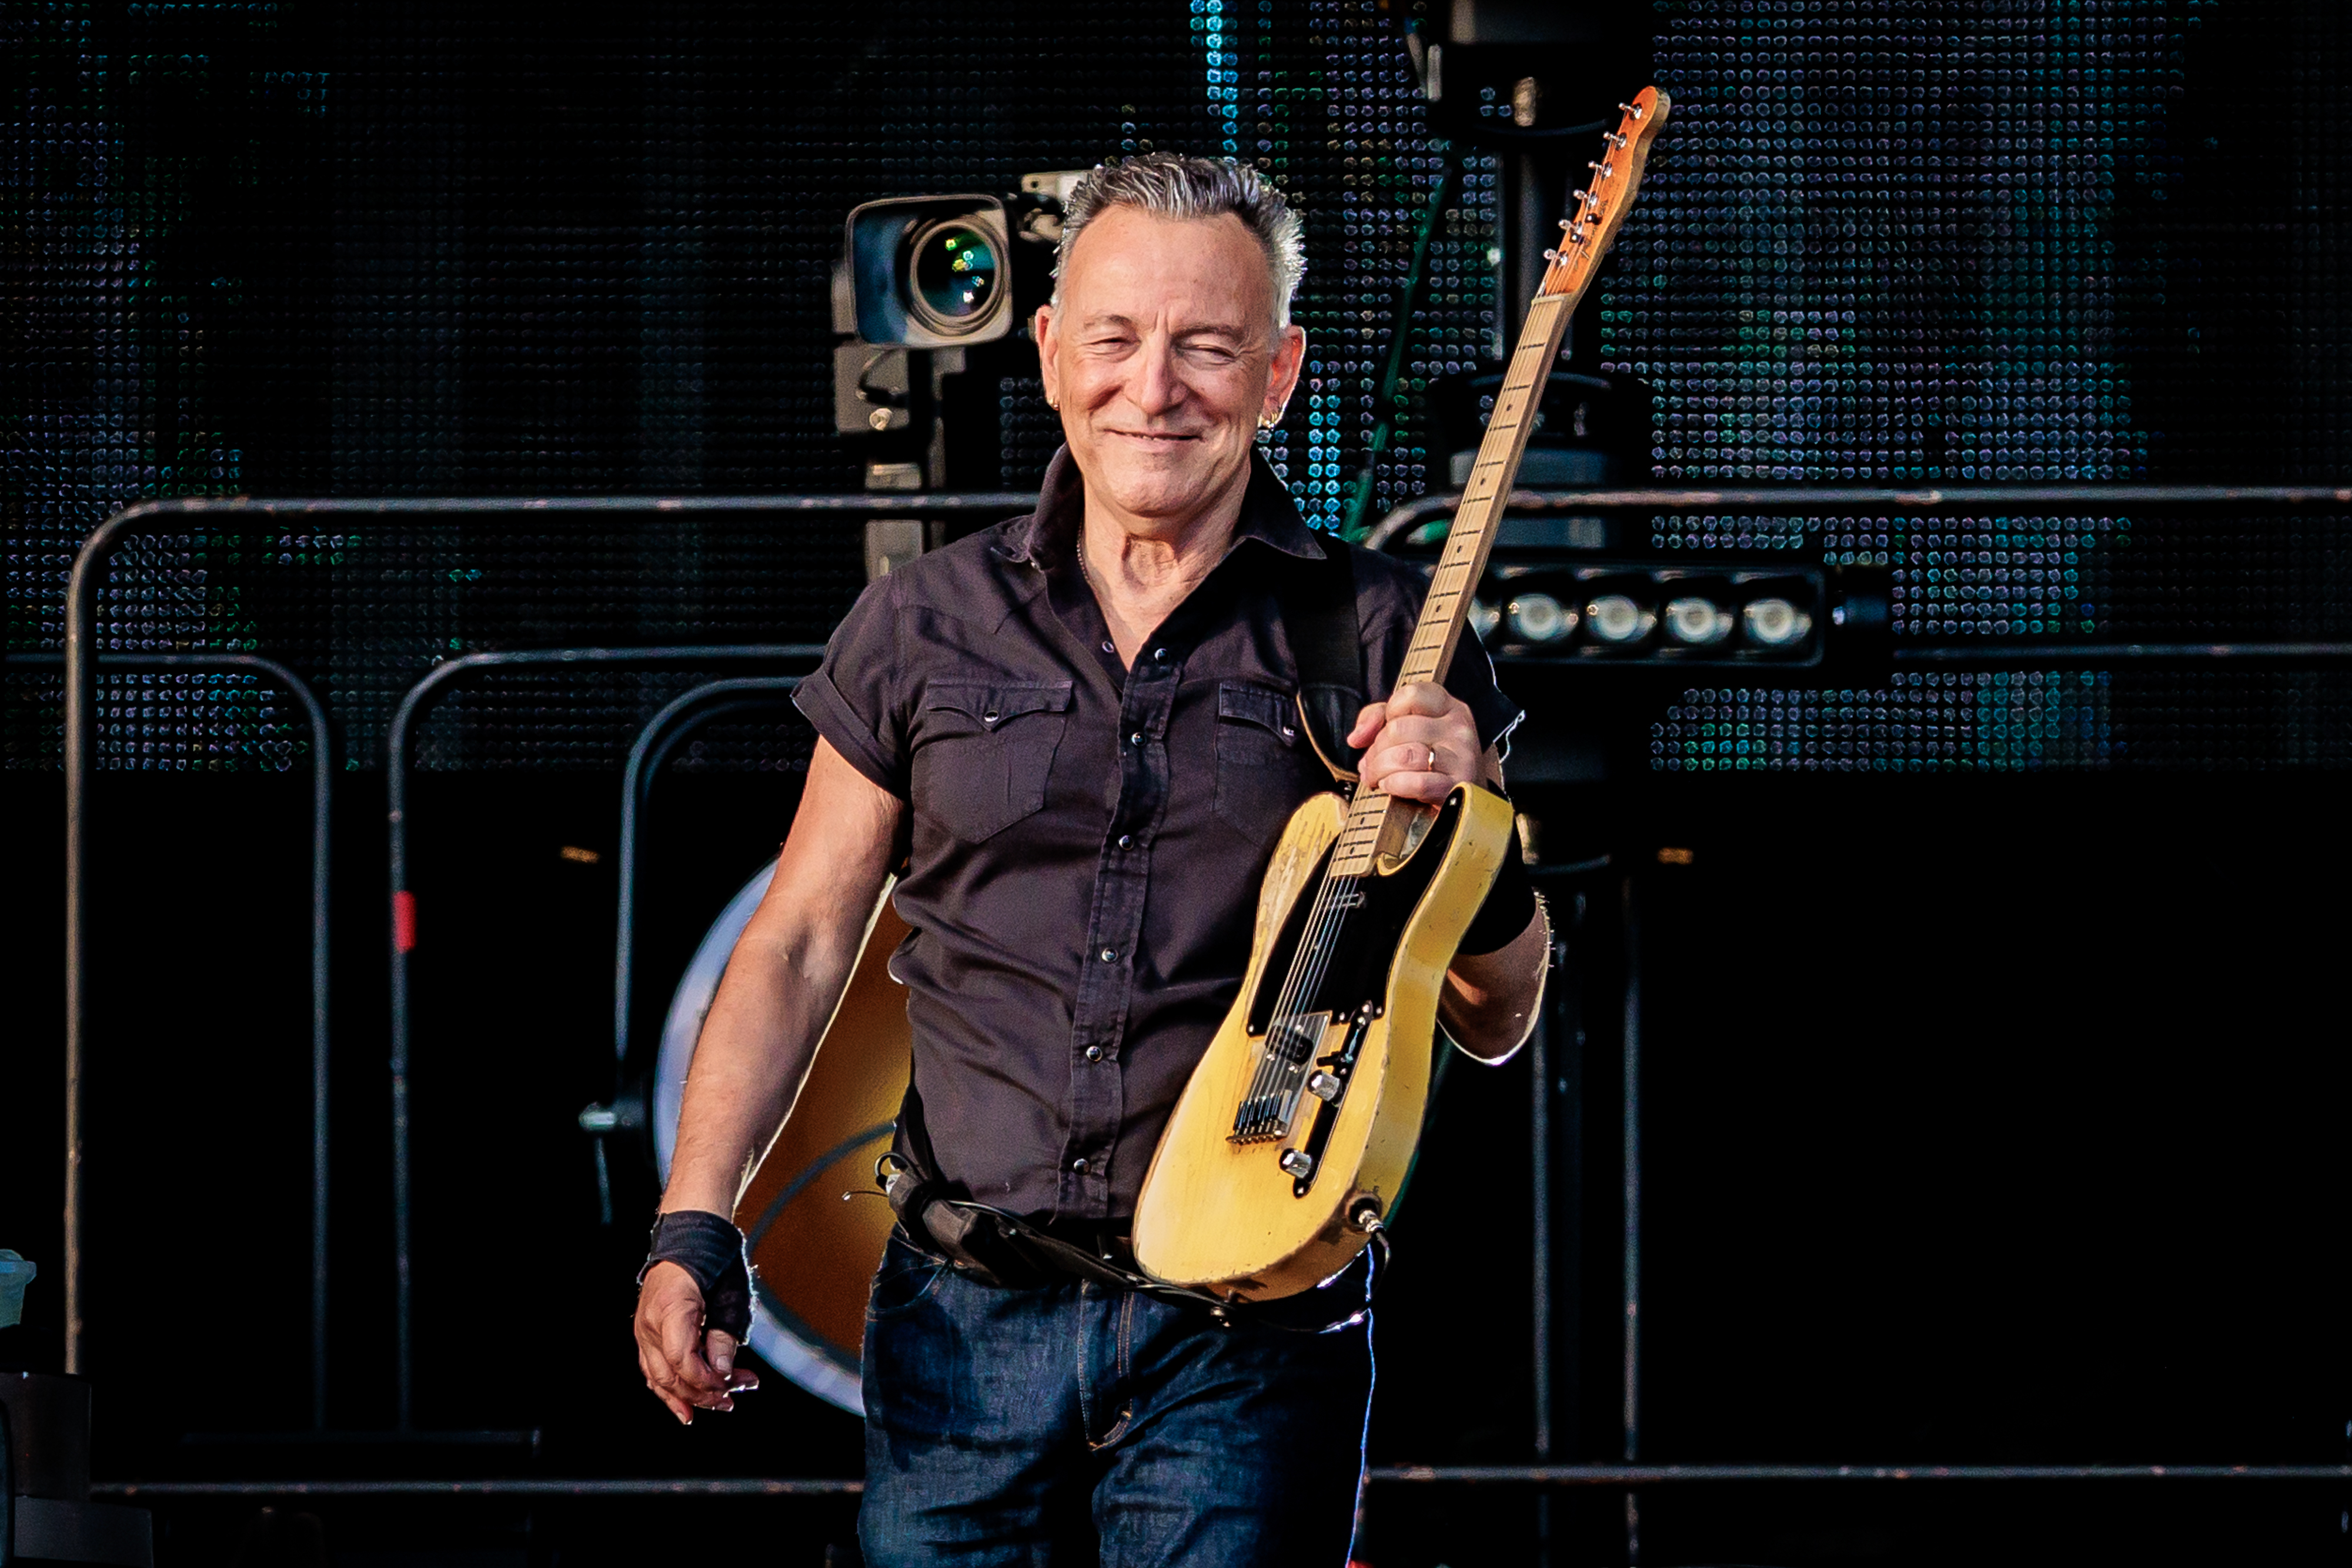 Bruce Springsteen holds his guitar as he stands on stage